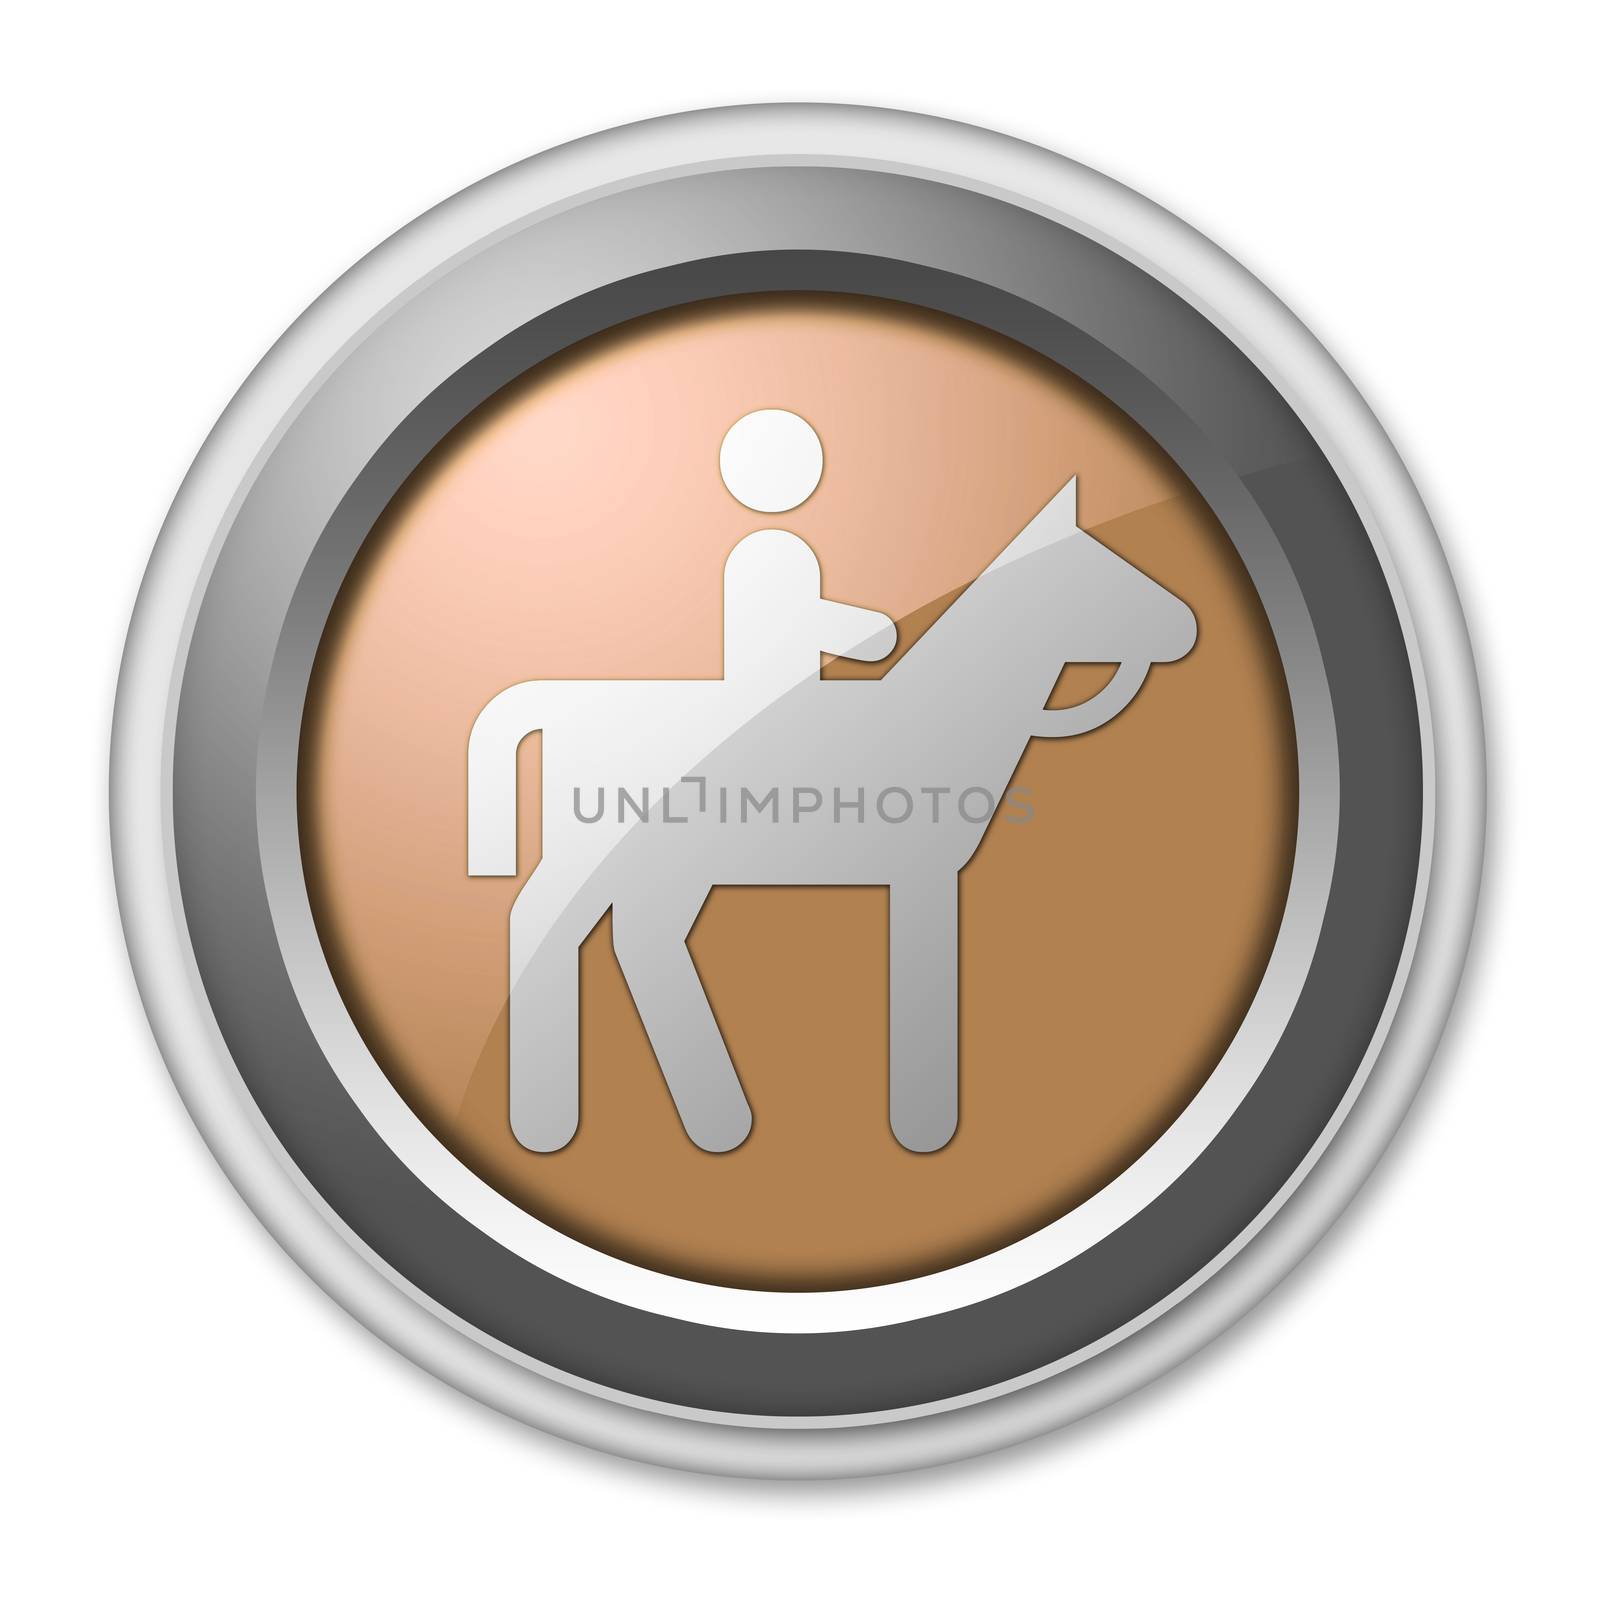 Icon, Button, Pictogram with Horse Trail symbol